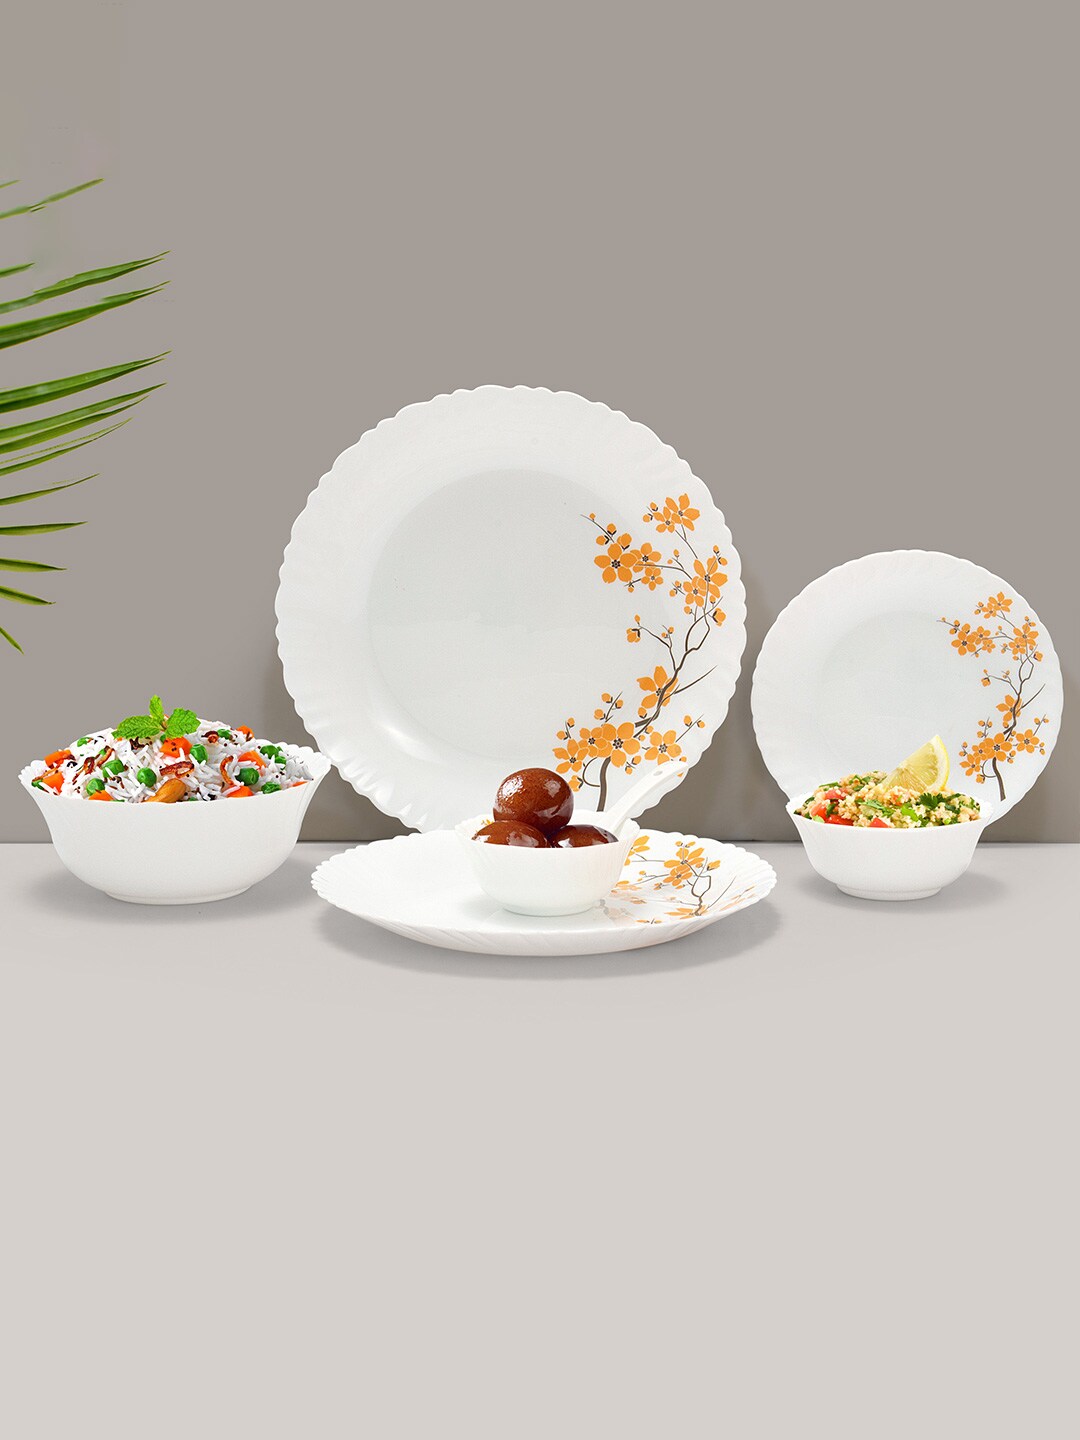 Athome by Nilkamal White & Orange Pieces Floral Stainless Steel Dinner Set Price in India